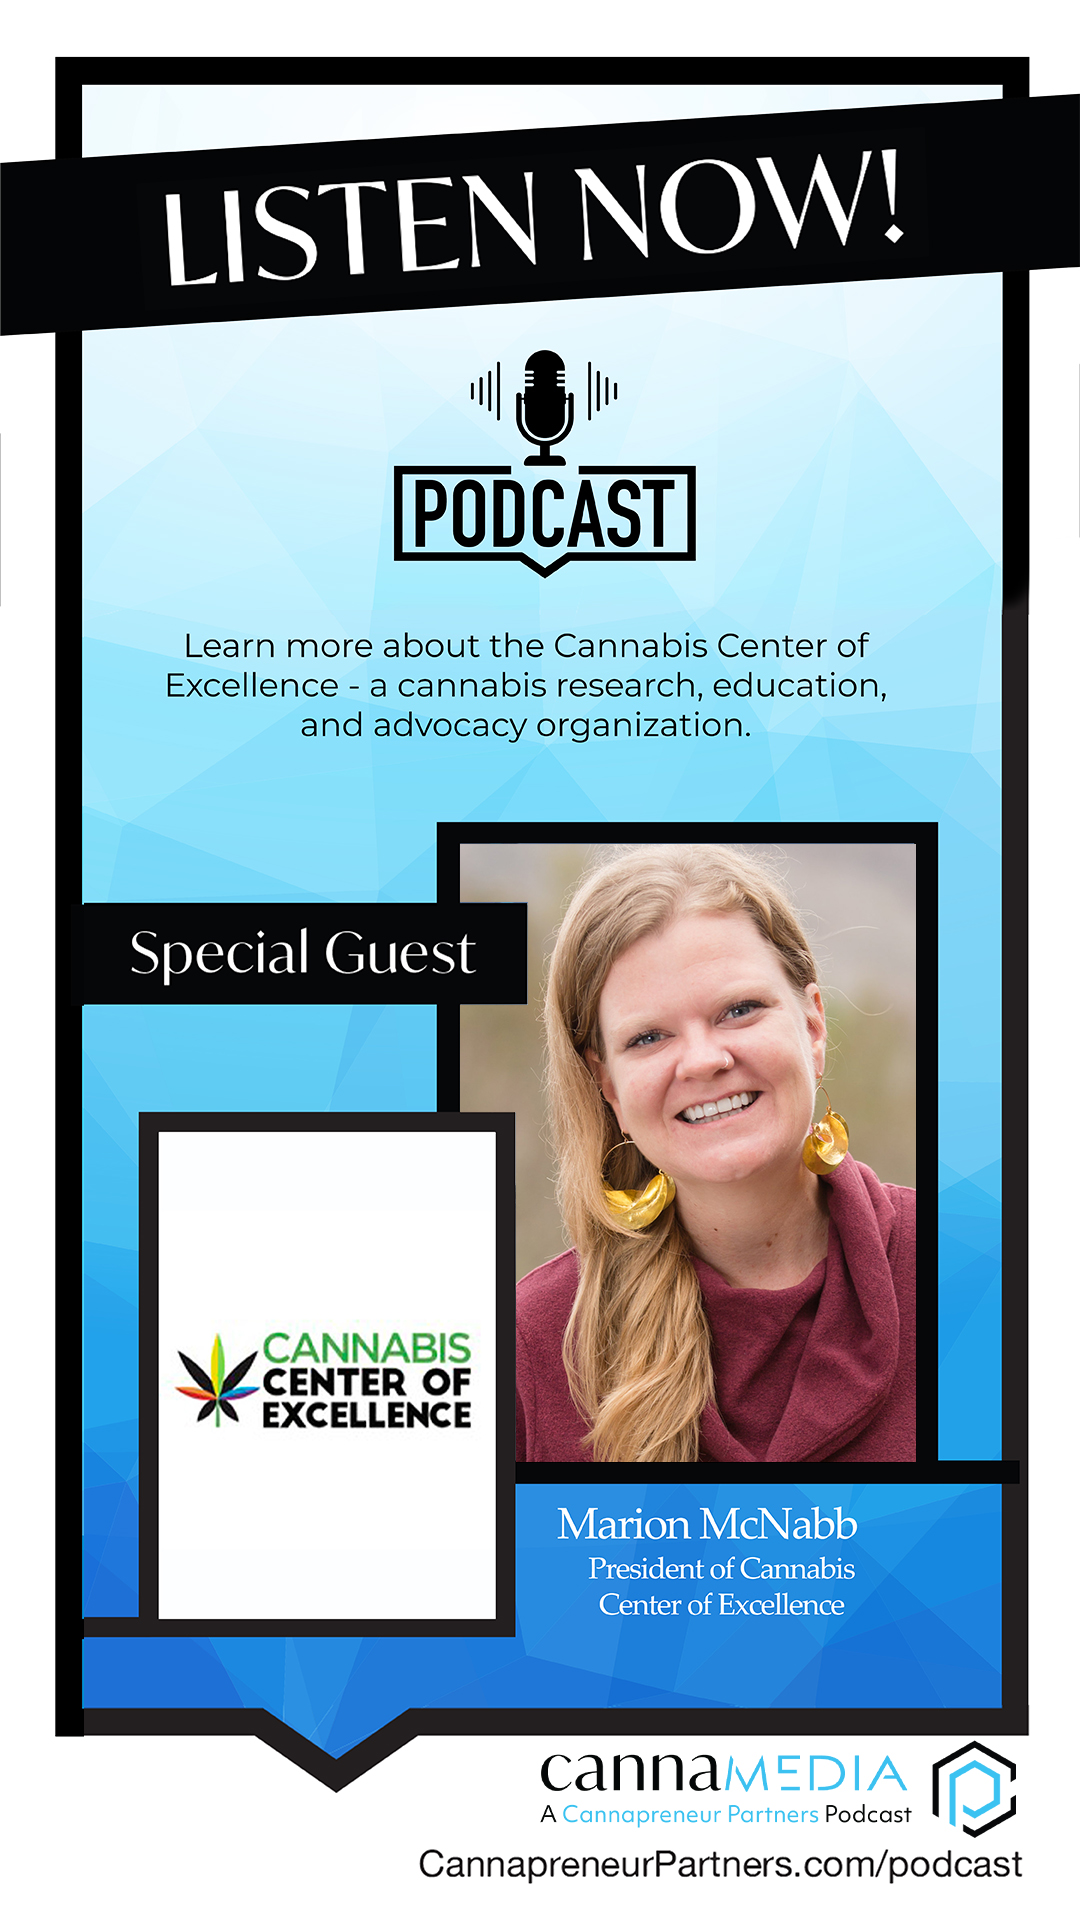 Dr. Marion McNabb – Cannabis Center of Excellence, President & Founder